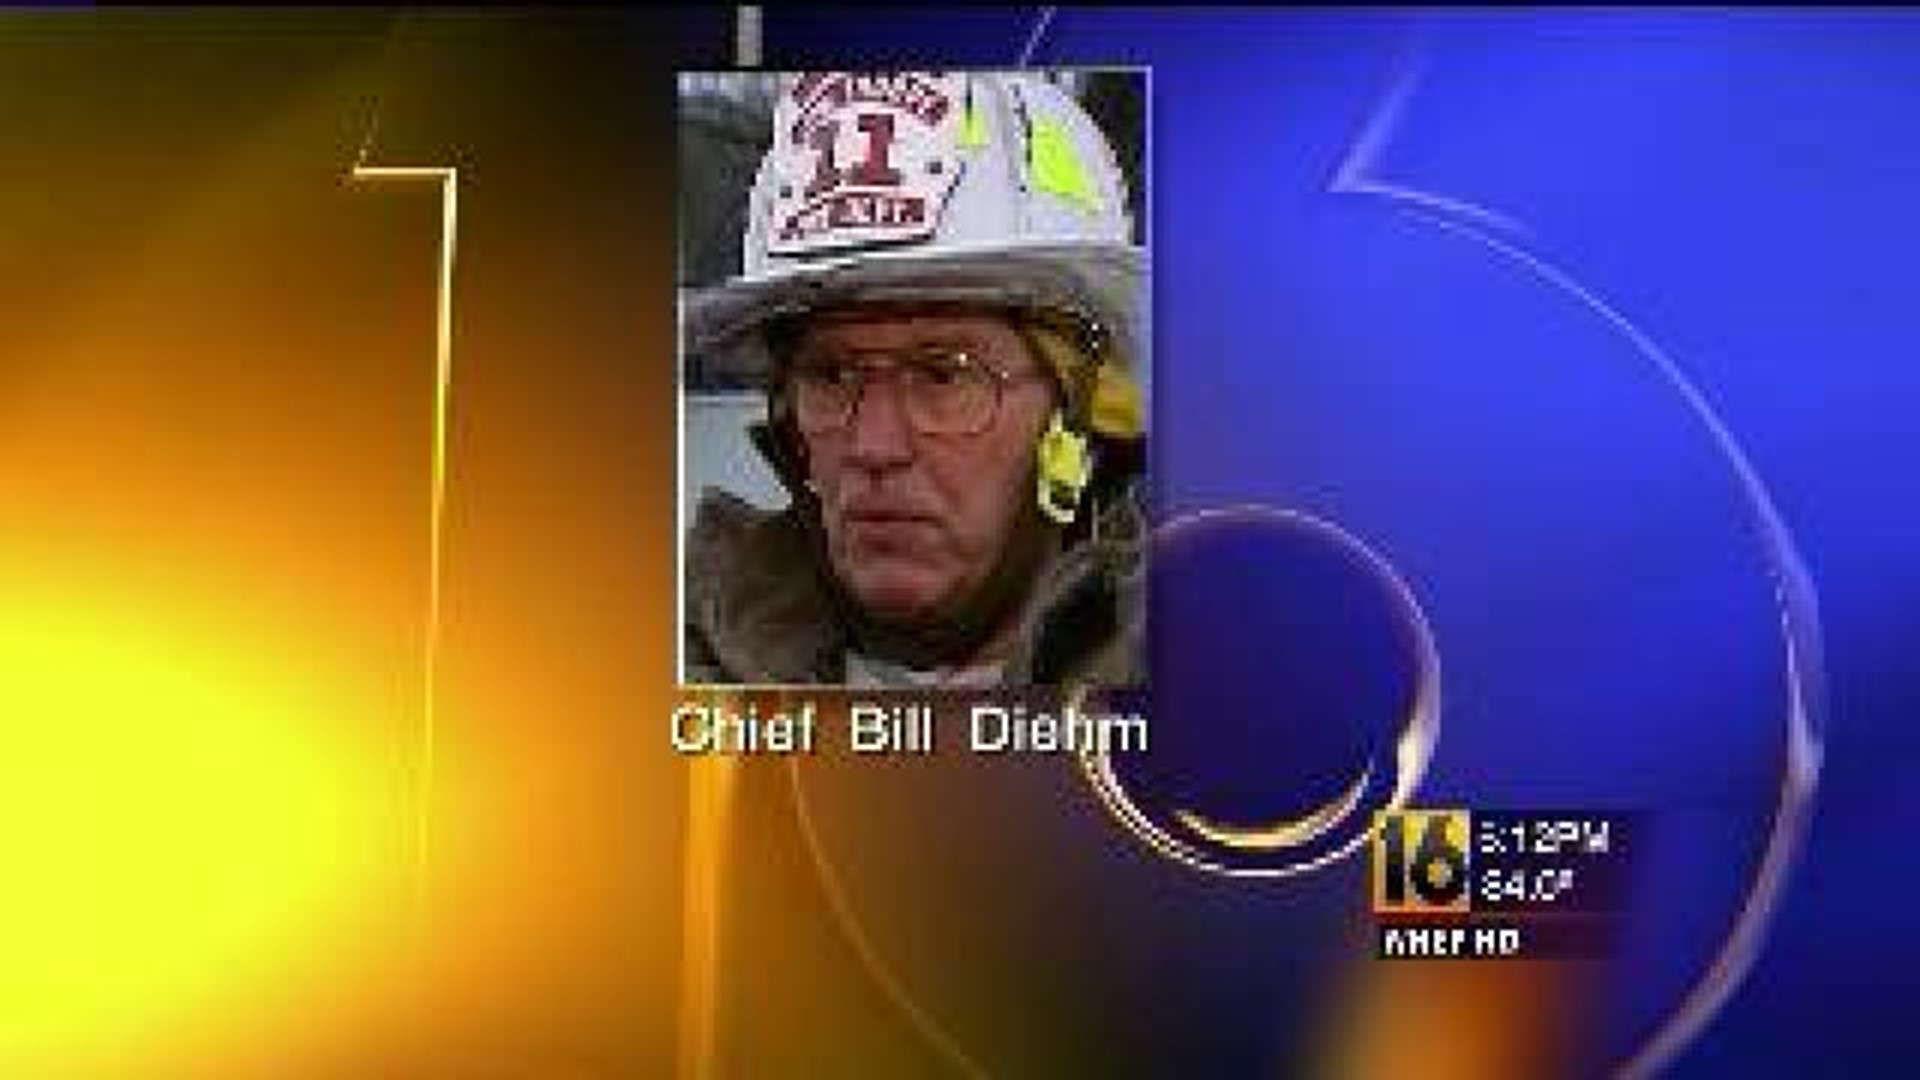 Fire Chief Hit by Delivery Truck